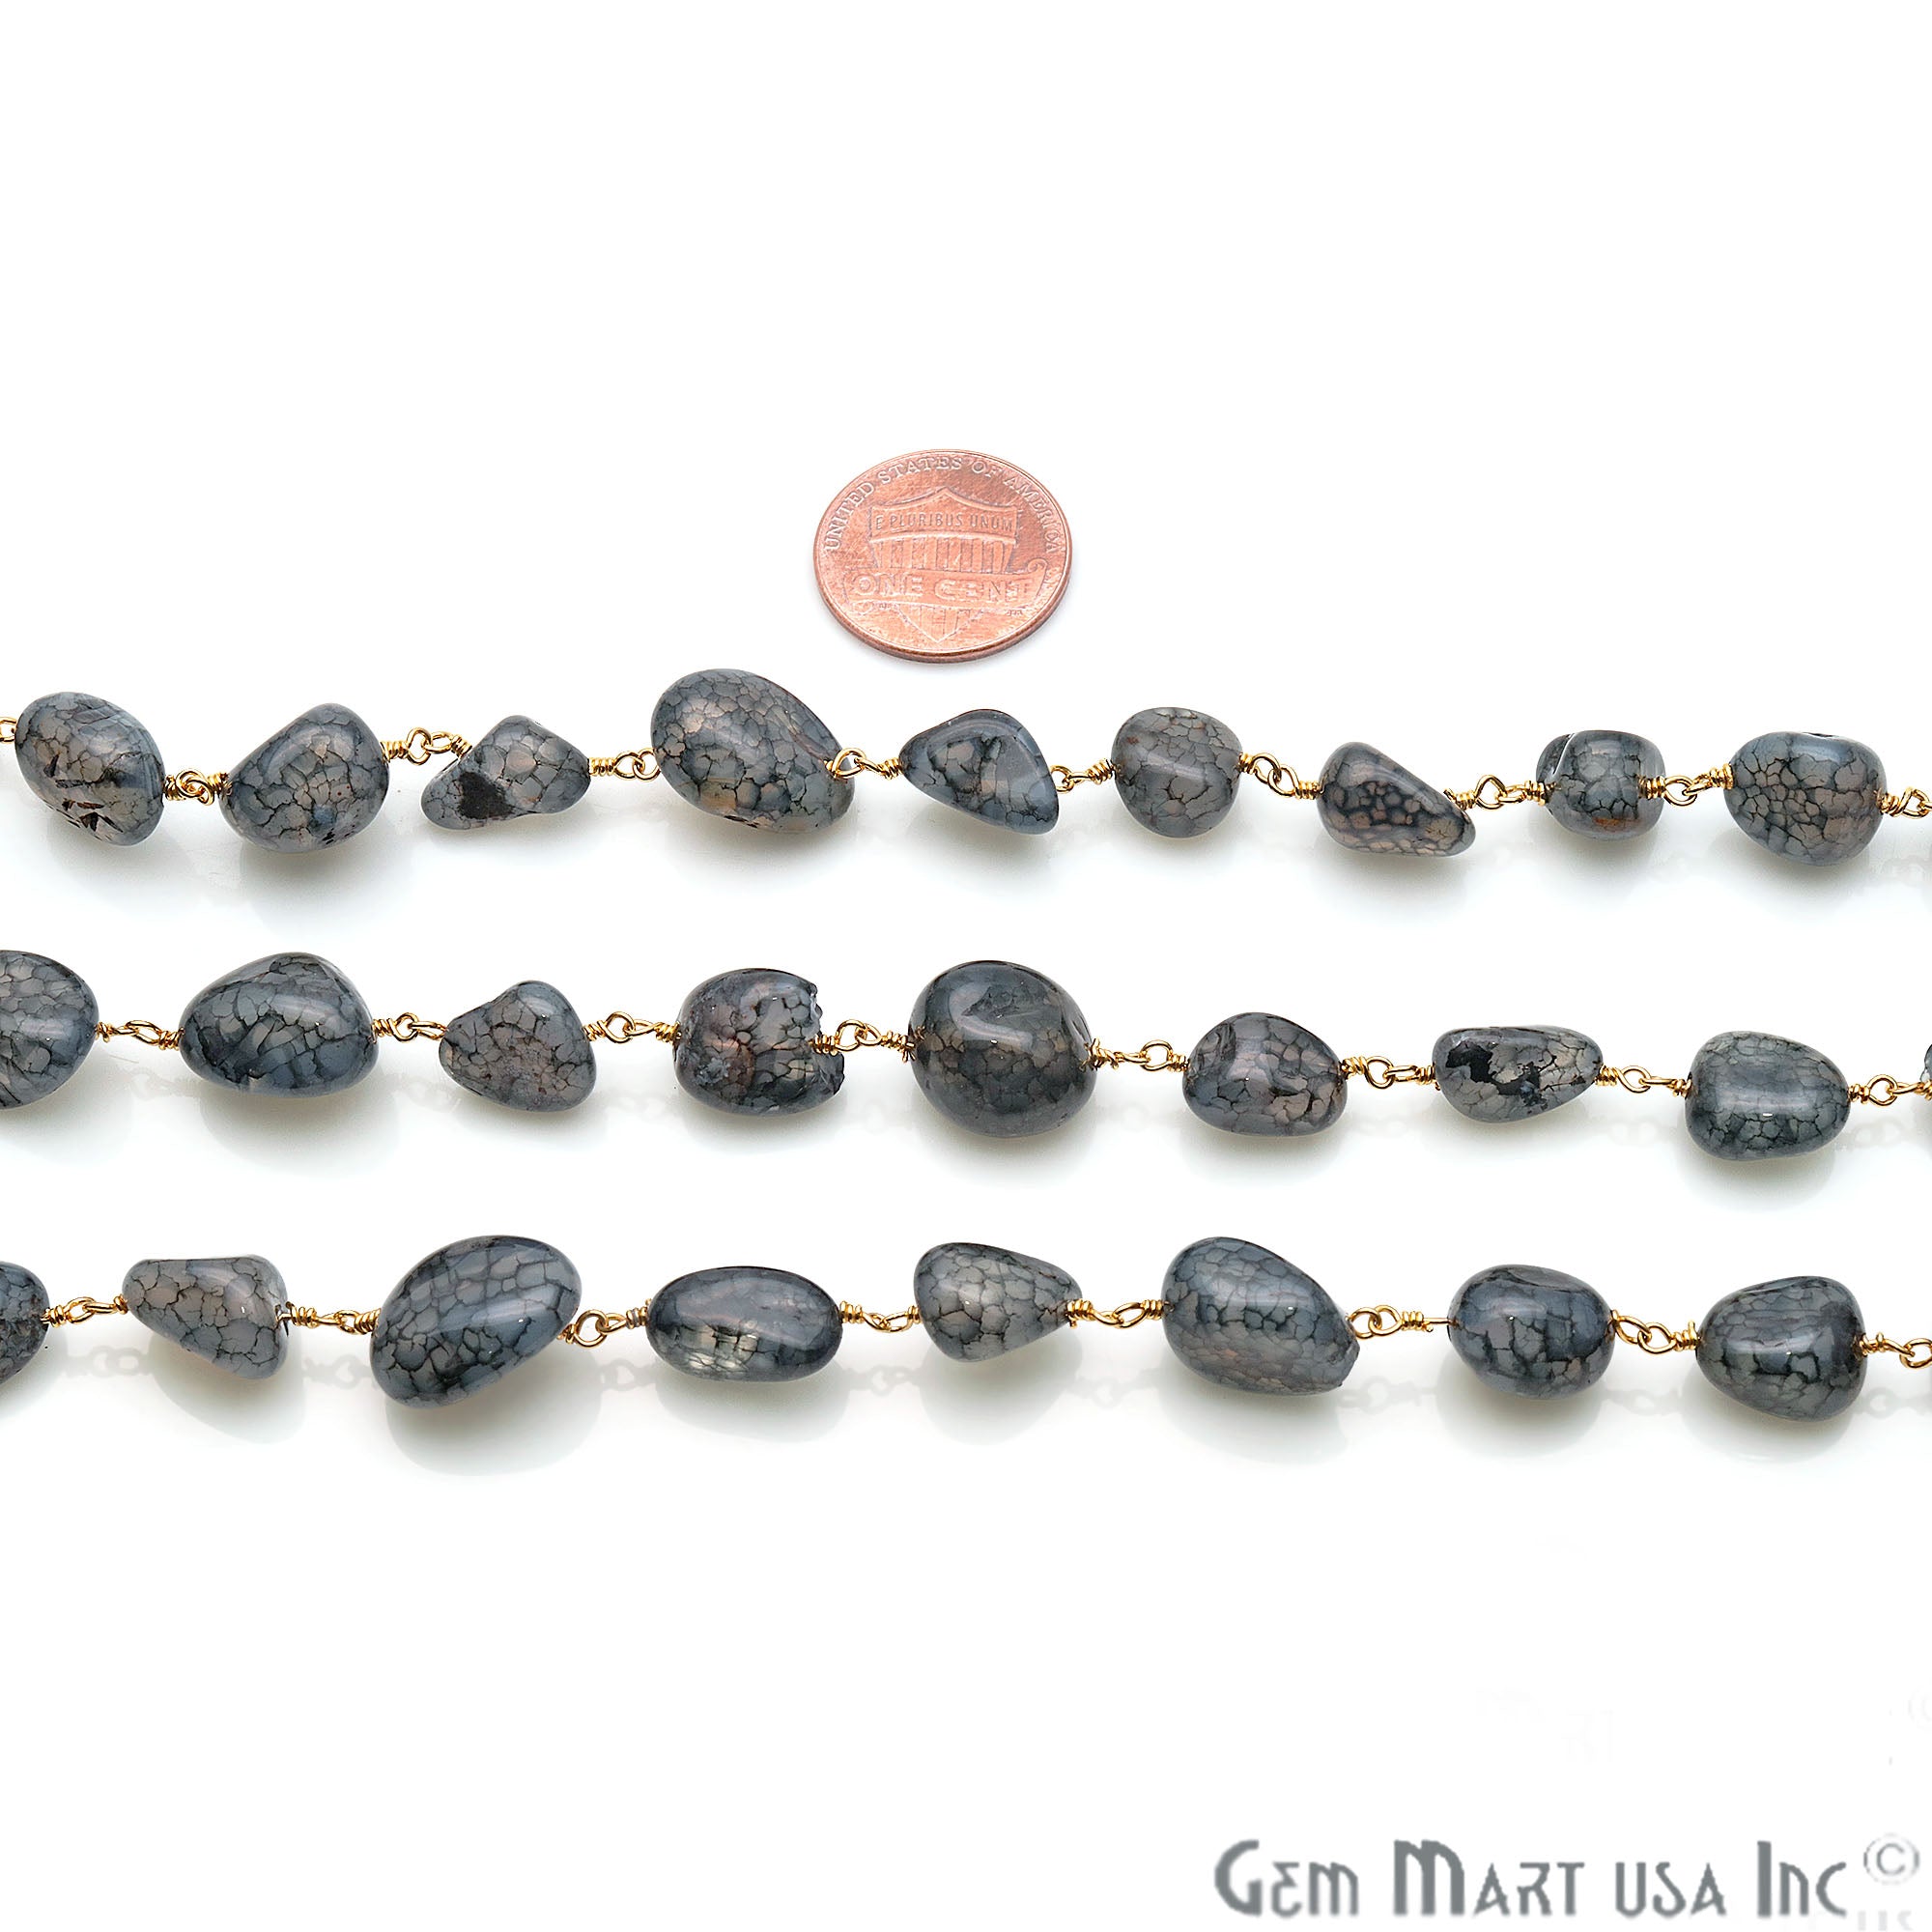 Black Crackle Quartz Tumble Beads Gold Plated Wire Wrapped Rosary Chain - GemMartUSA